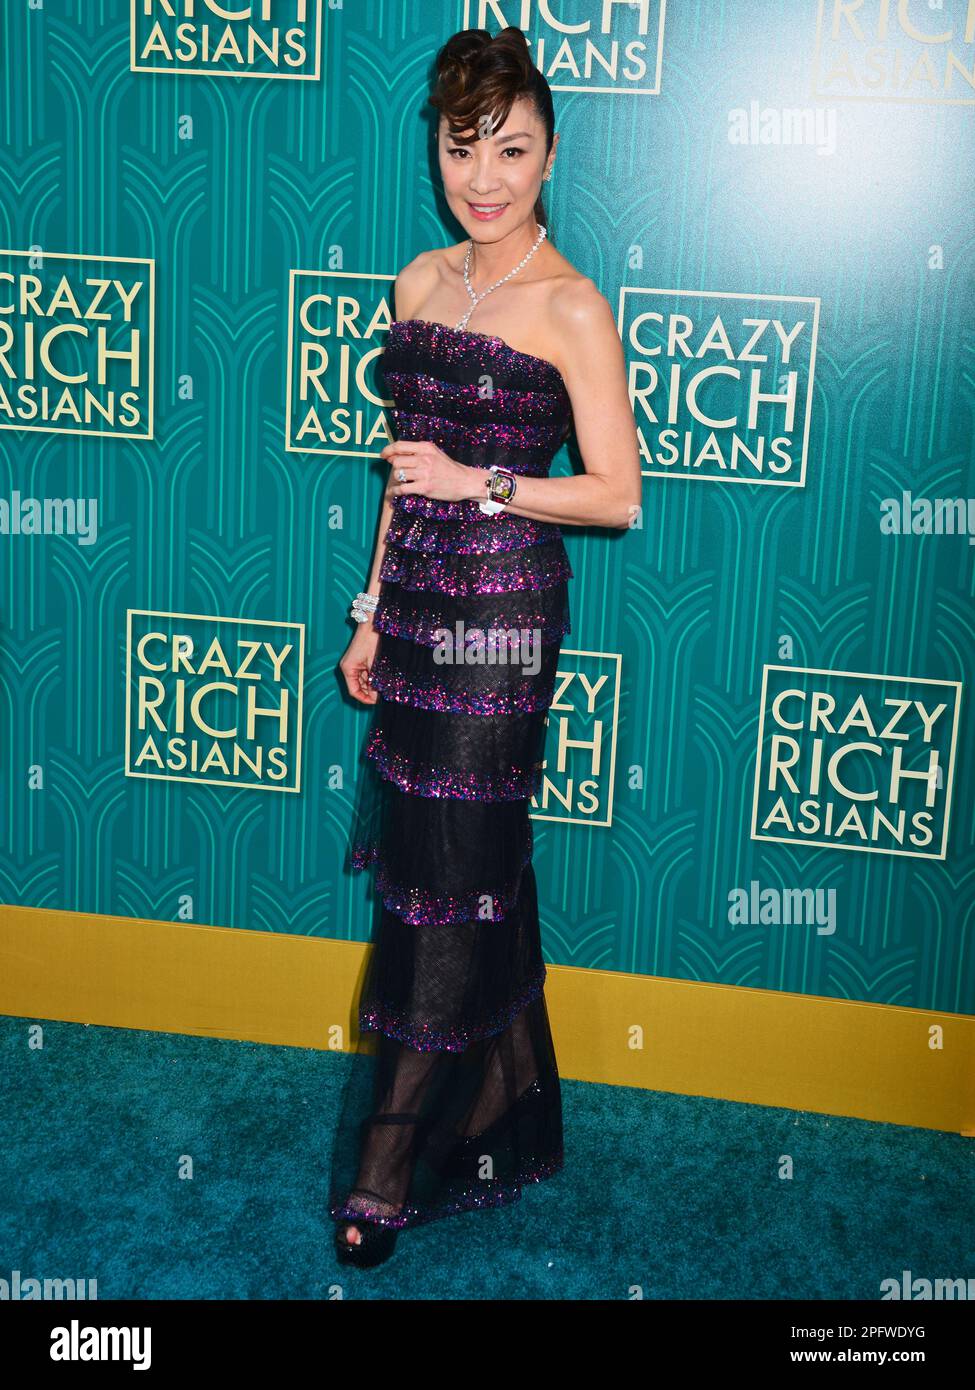 Michelle Yeoh 102 arrives at the Warner Bros. Pictures' 'Crazy Rich Asians' premiere at the TCL Chinese Theatre IMAX on August 7, 2018 in HollywoodRichard Belzer, Comedian and Law & Order- SVU Mainstay, Dead at 78    © Tsuni / USA Michelle Yeoh 102 Stock Photo